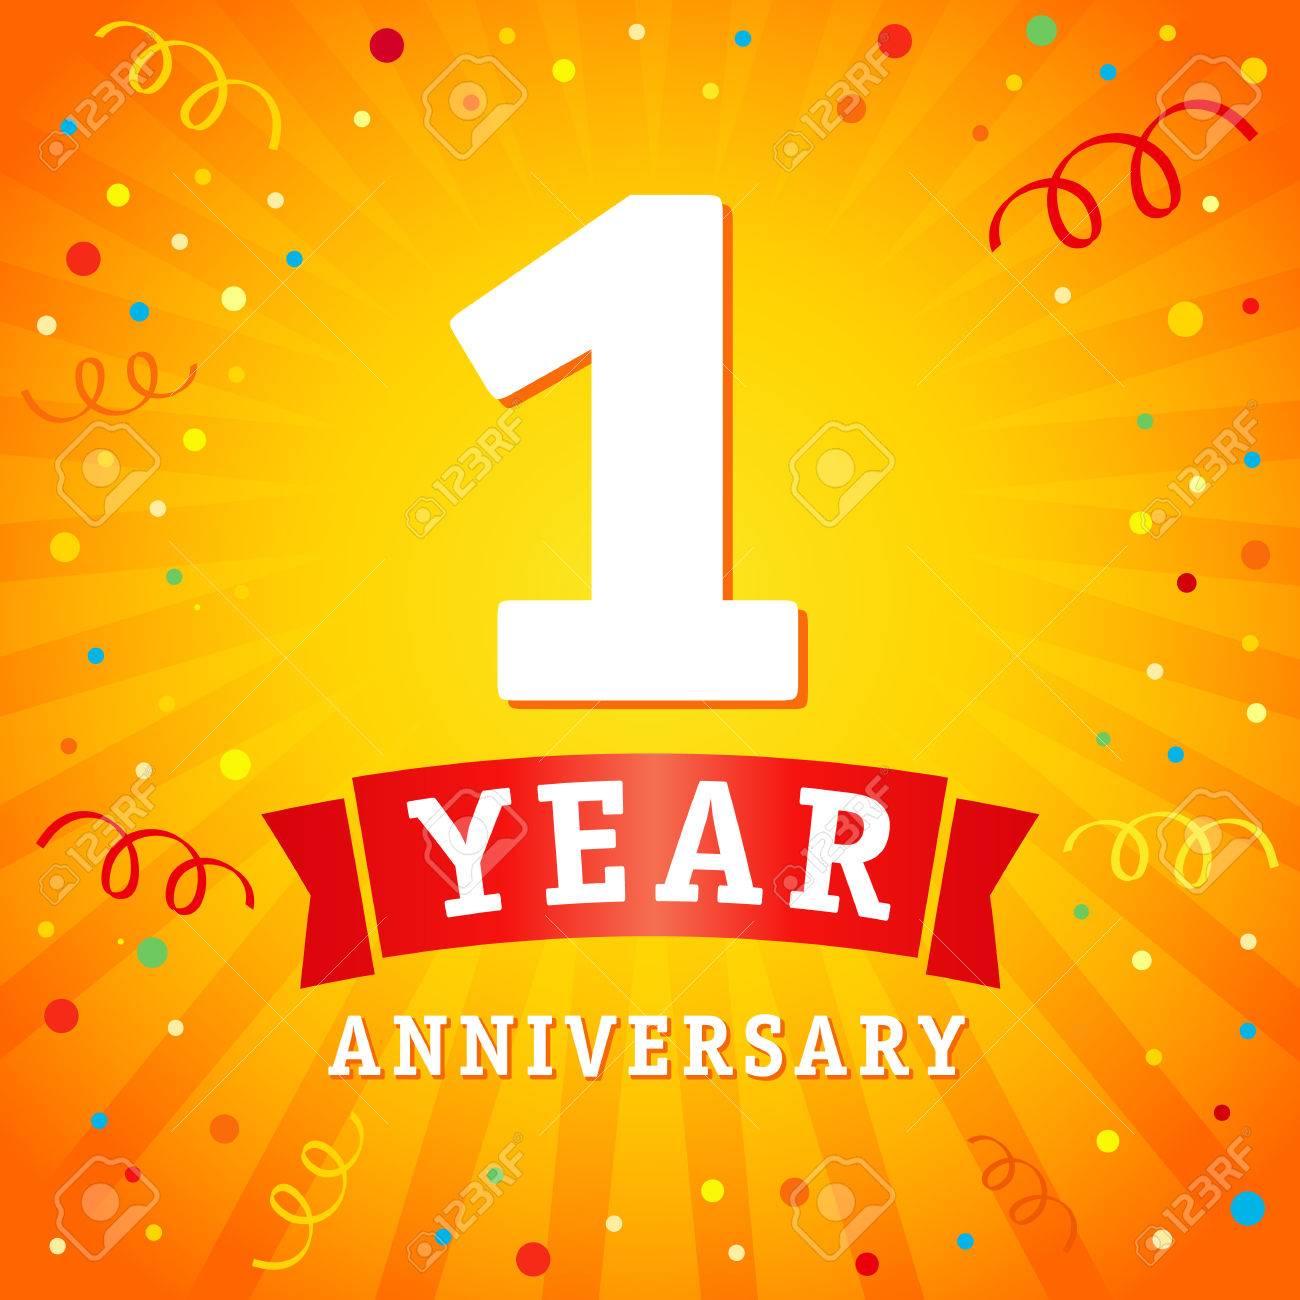 81953968-1-year-anniversary-logo-celebration-card-1st-year-anniversary-vector-background-with-red-ribbon-and-.jpg